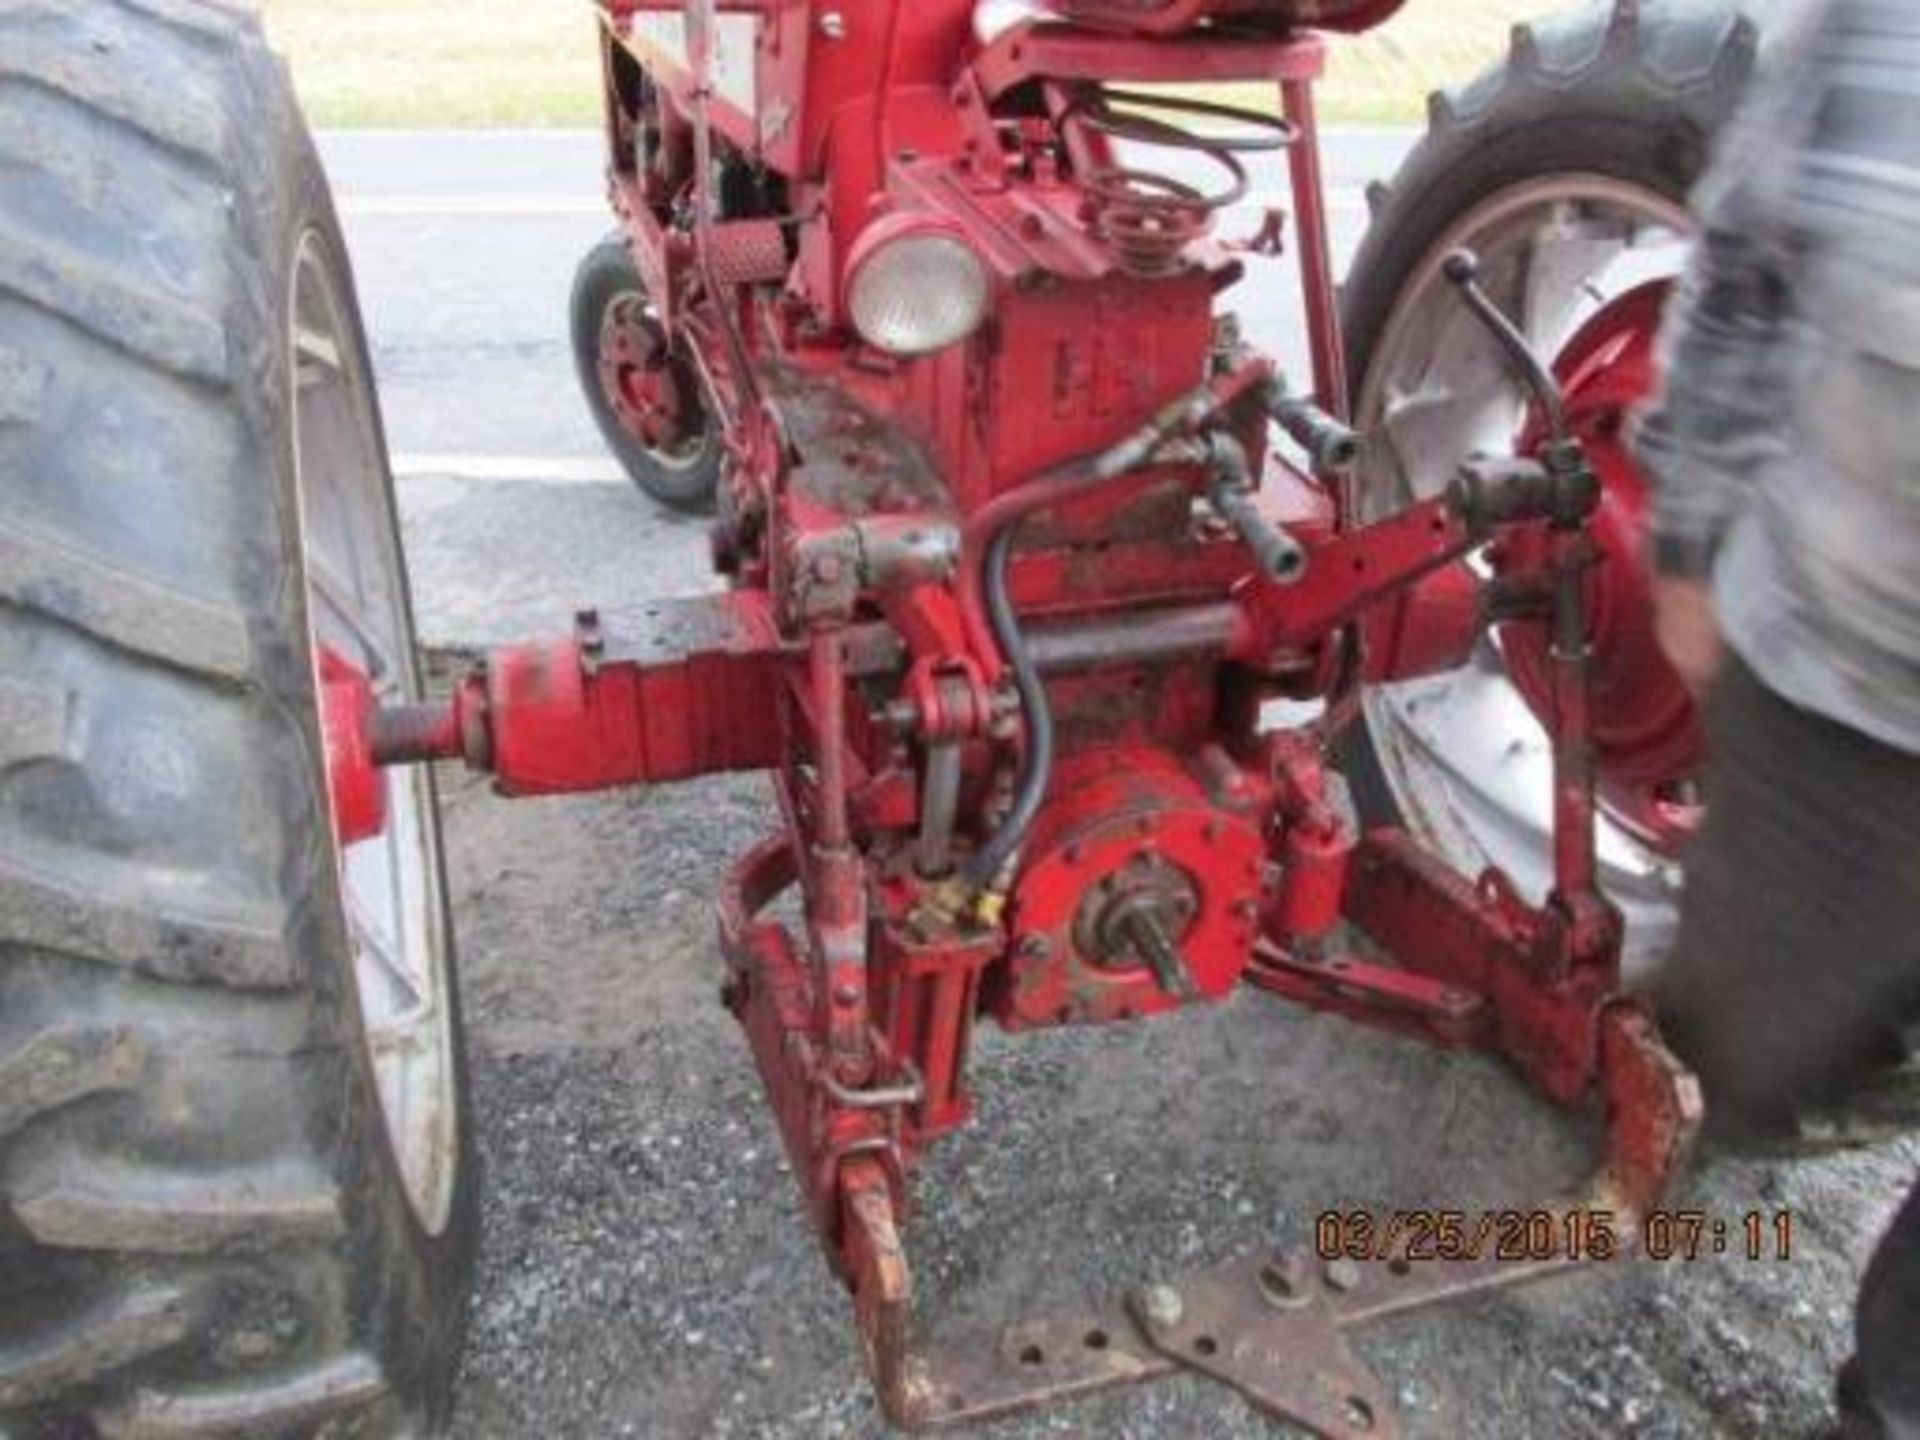 Farmall 350 S#512, 12th of the 350's built - Image 9 of 9